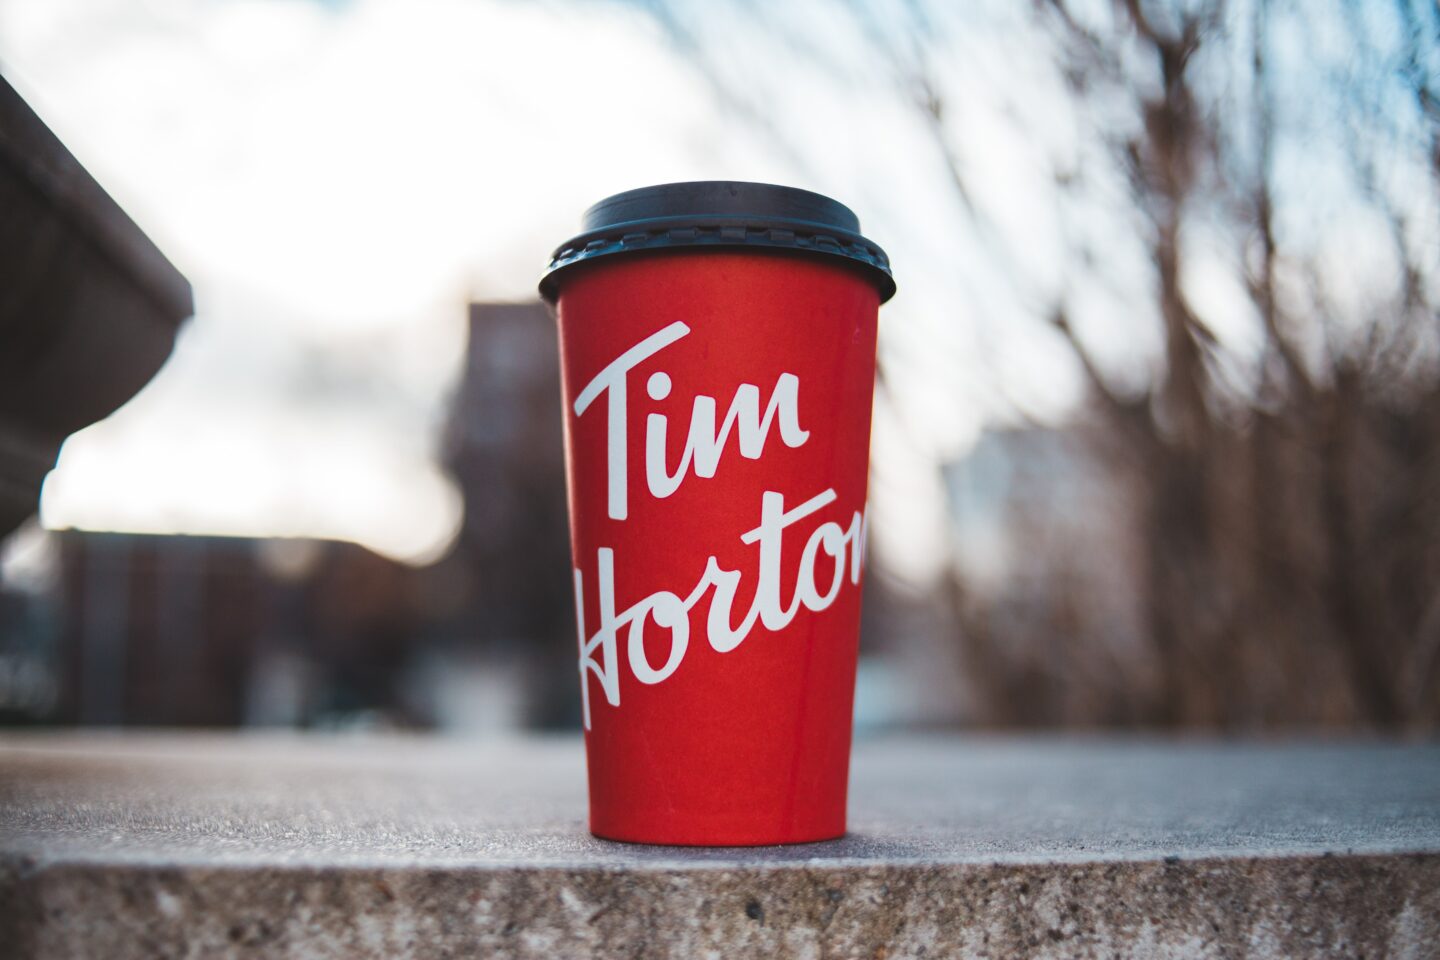 tim hortons takeaway cup on stone surface